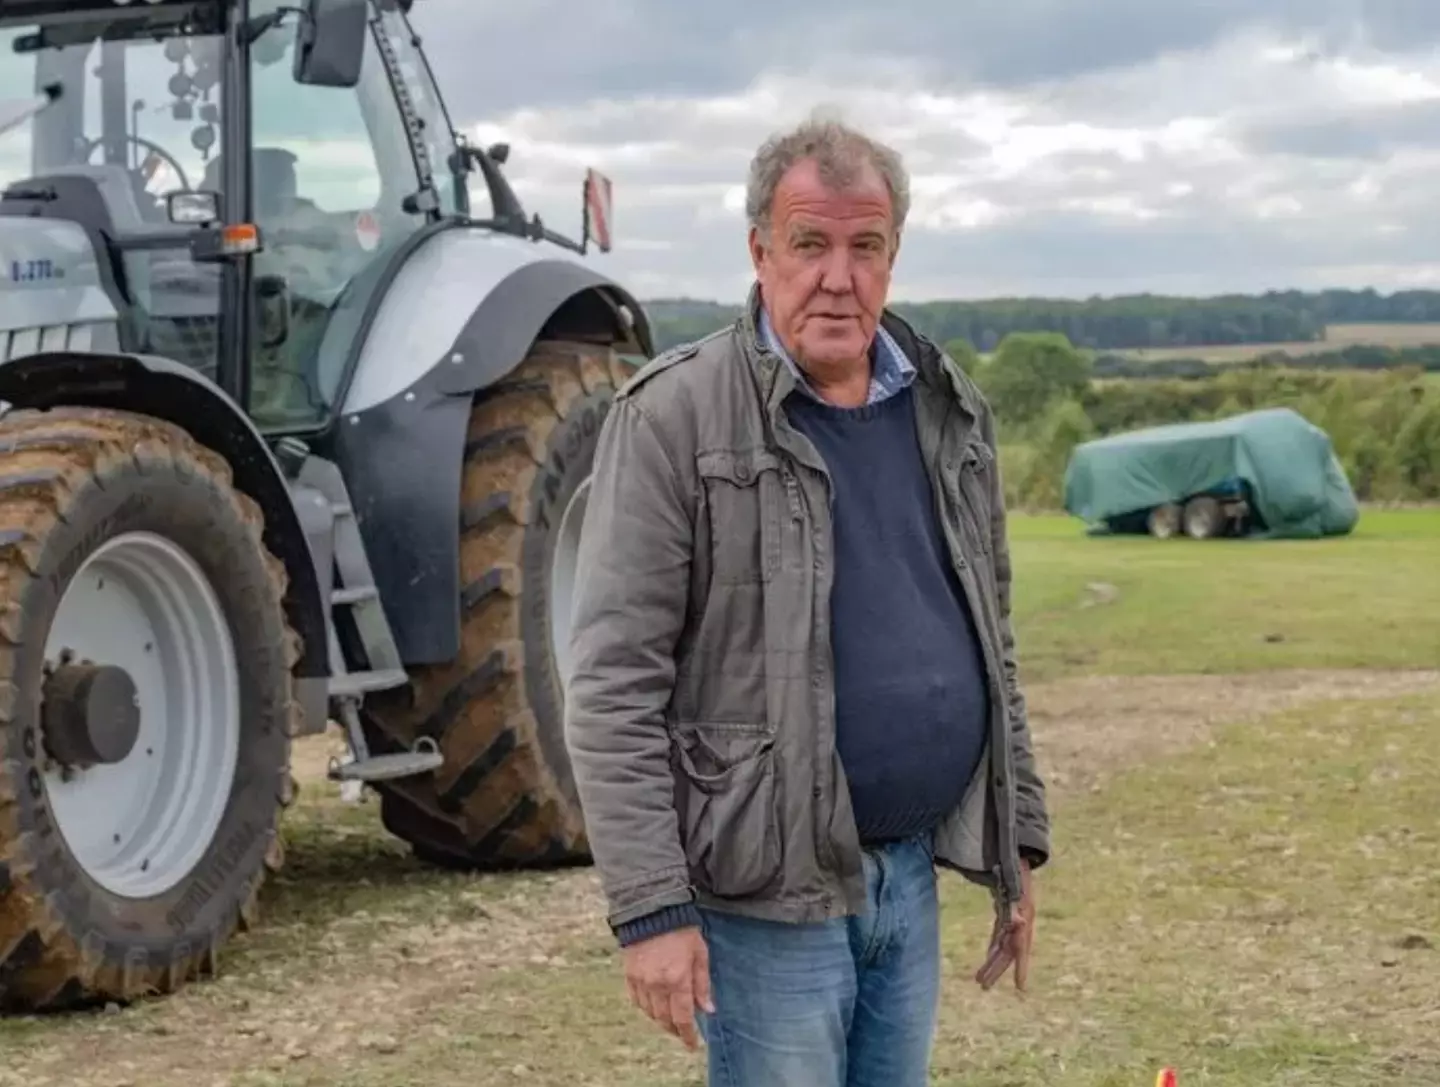 Clarkson has previously spoken out about the difficulties facing farmers in the UK.